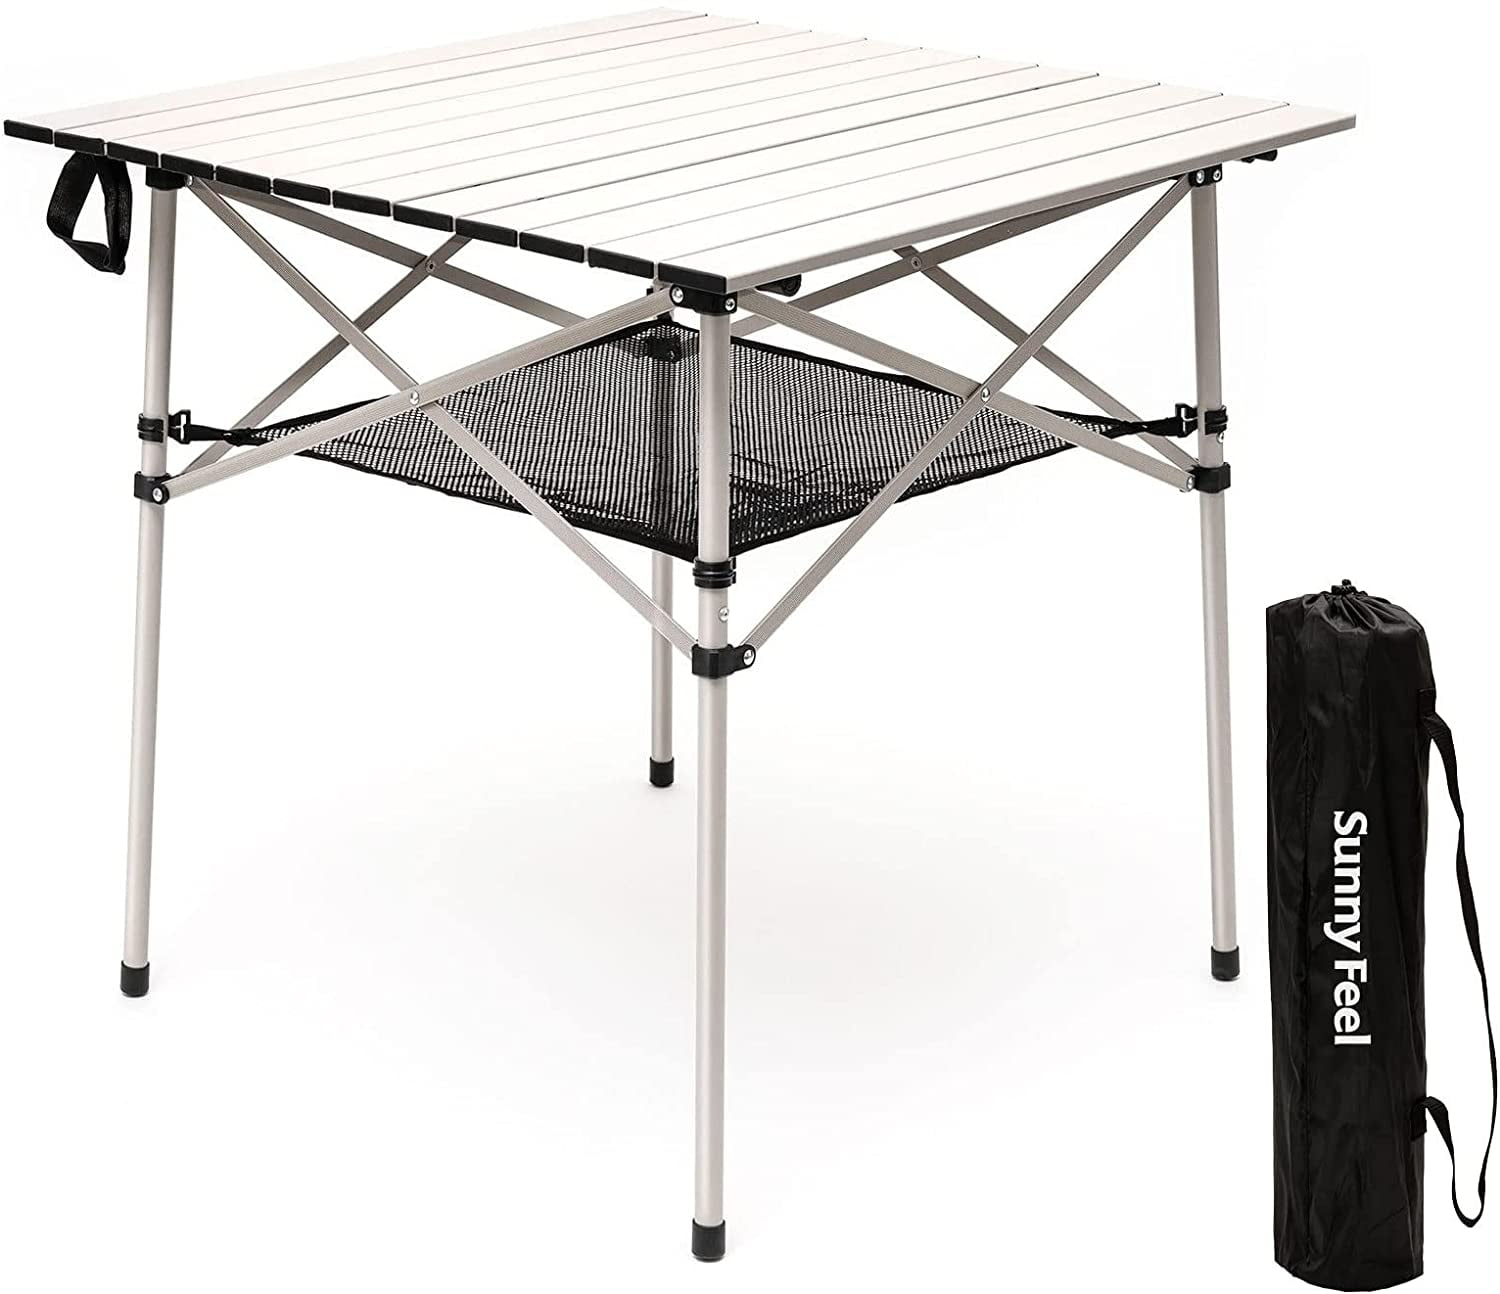 4ft Folding Camping Table Outdoor Garden Picnic Festival Fishing BBQ Table Back 